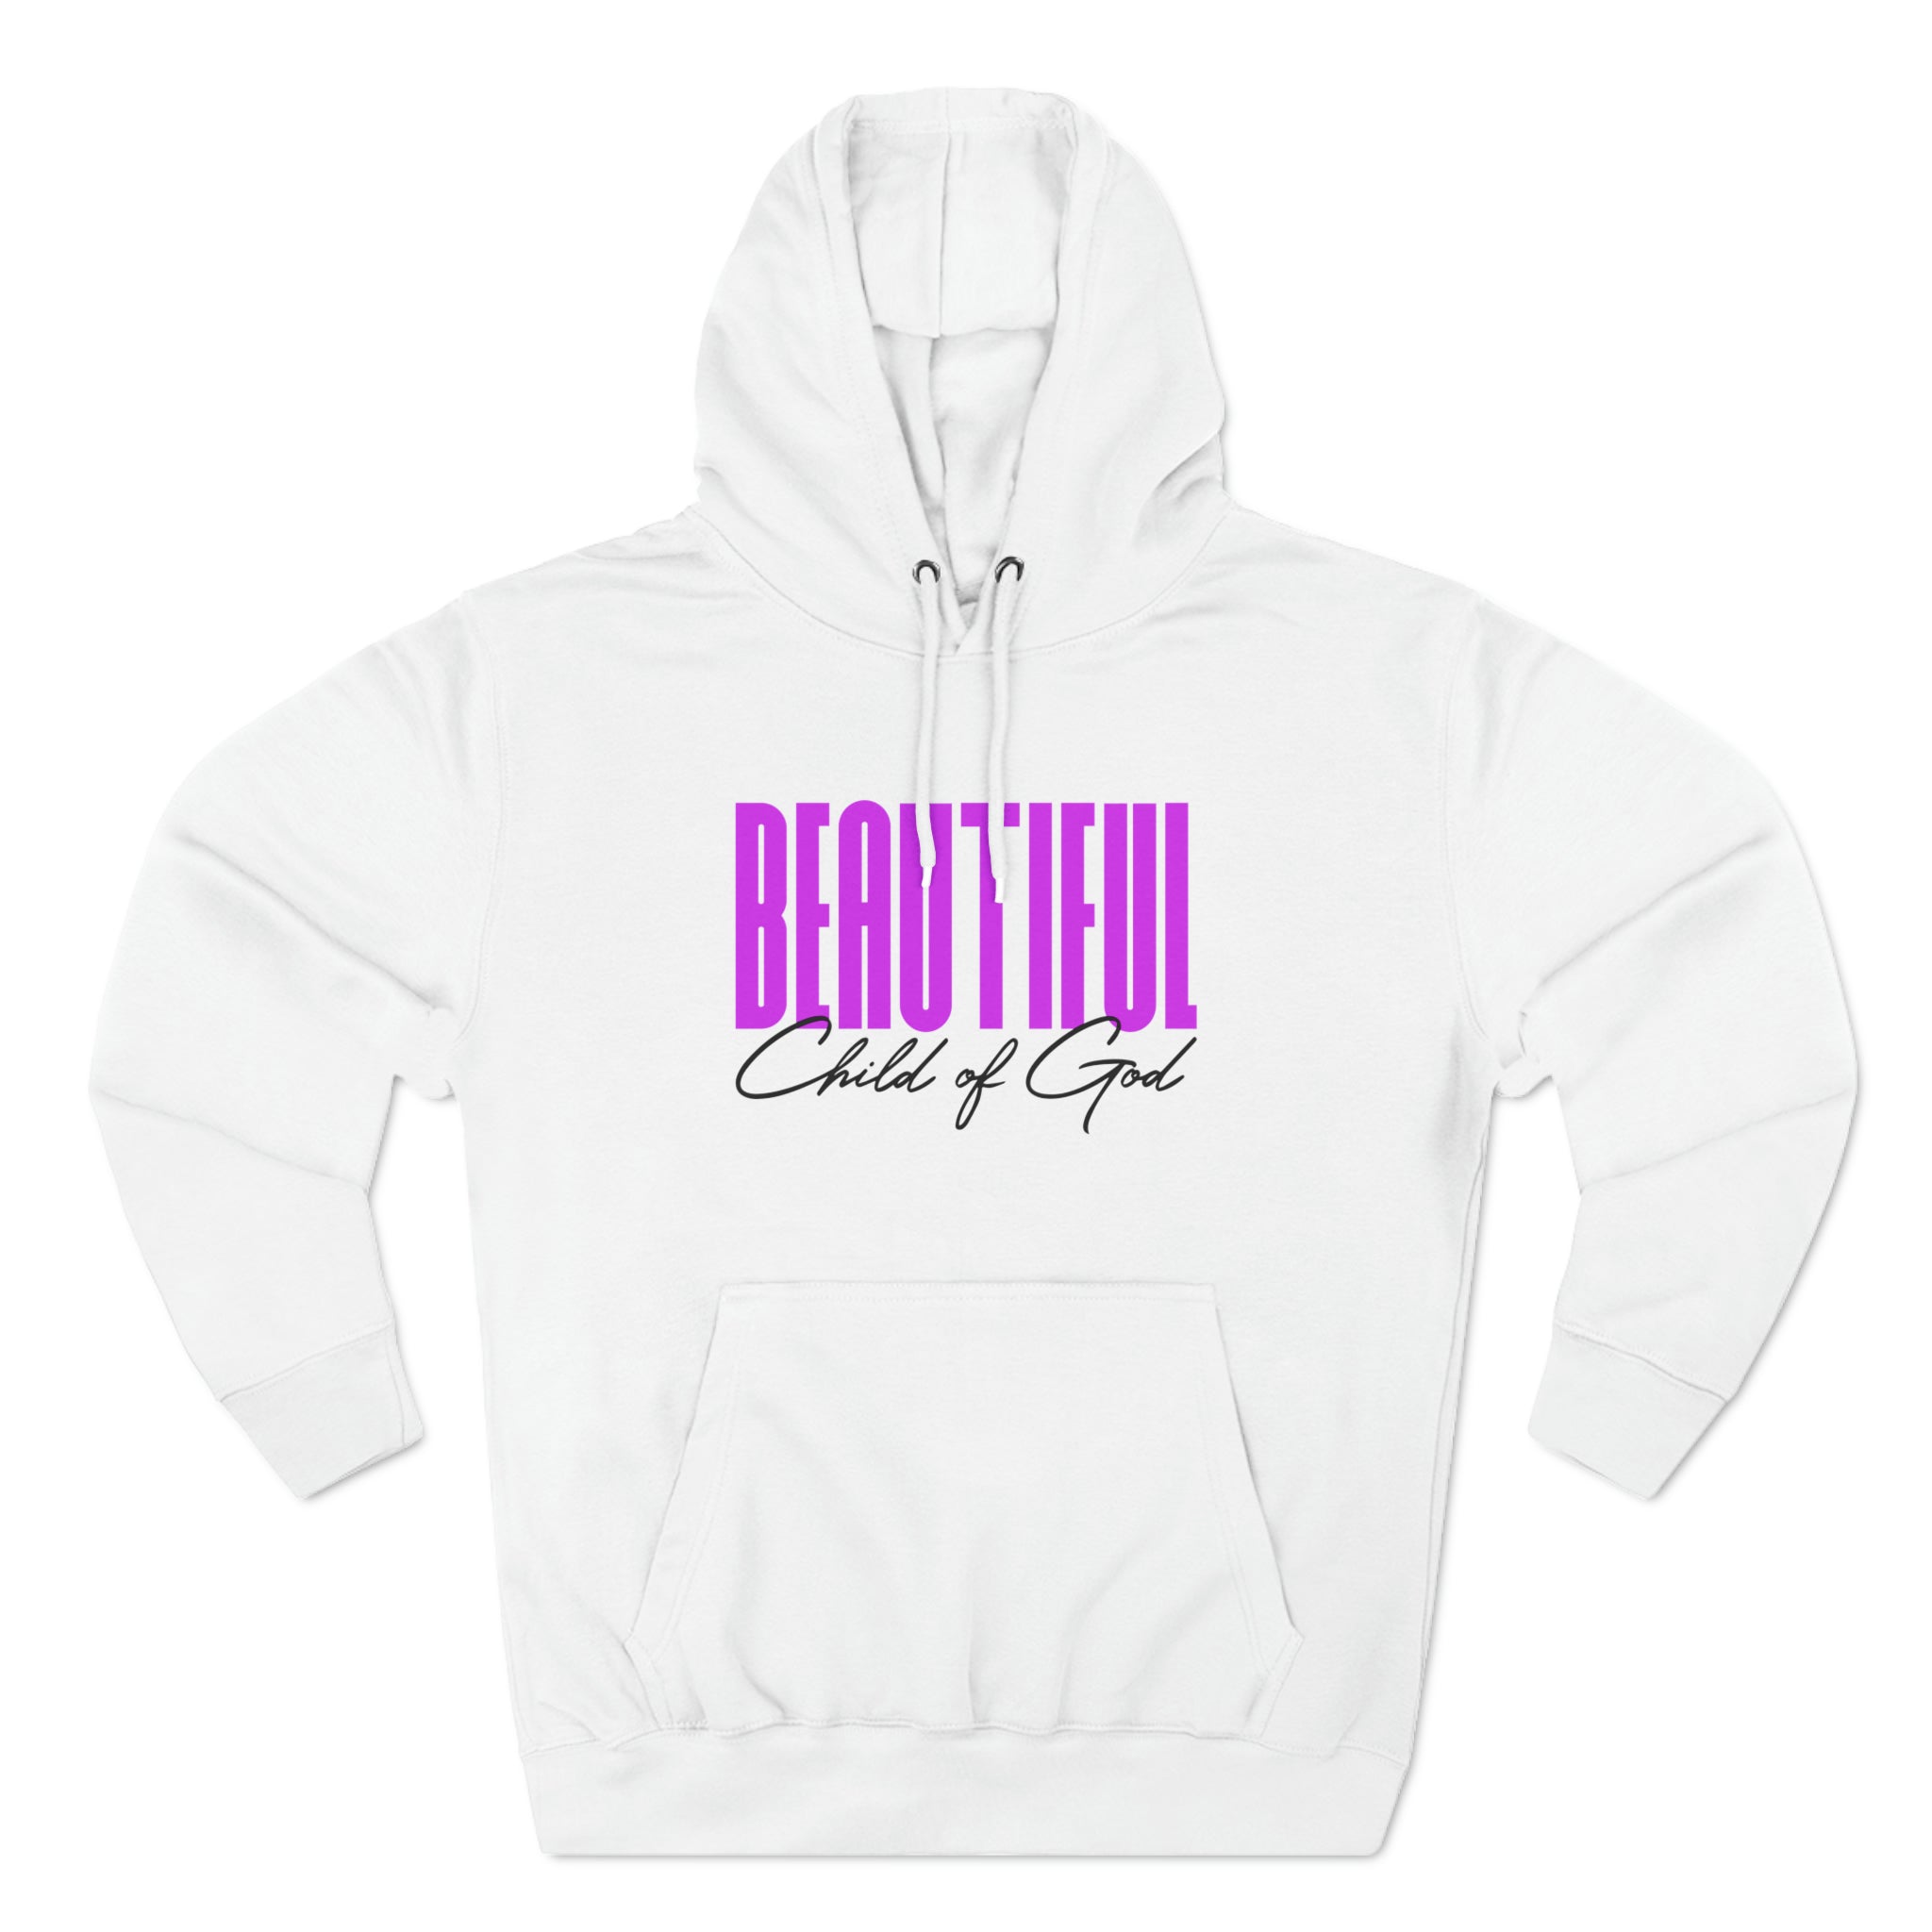 Beautiful Child of God Unisex Premium Pullover Hoodie - Child of God Project